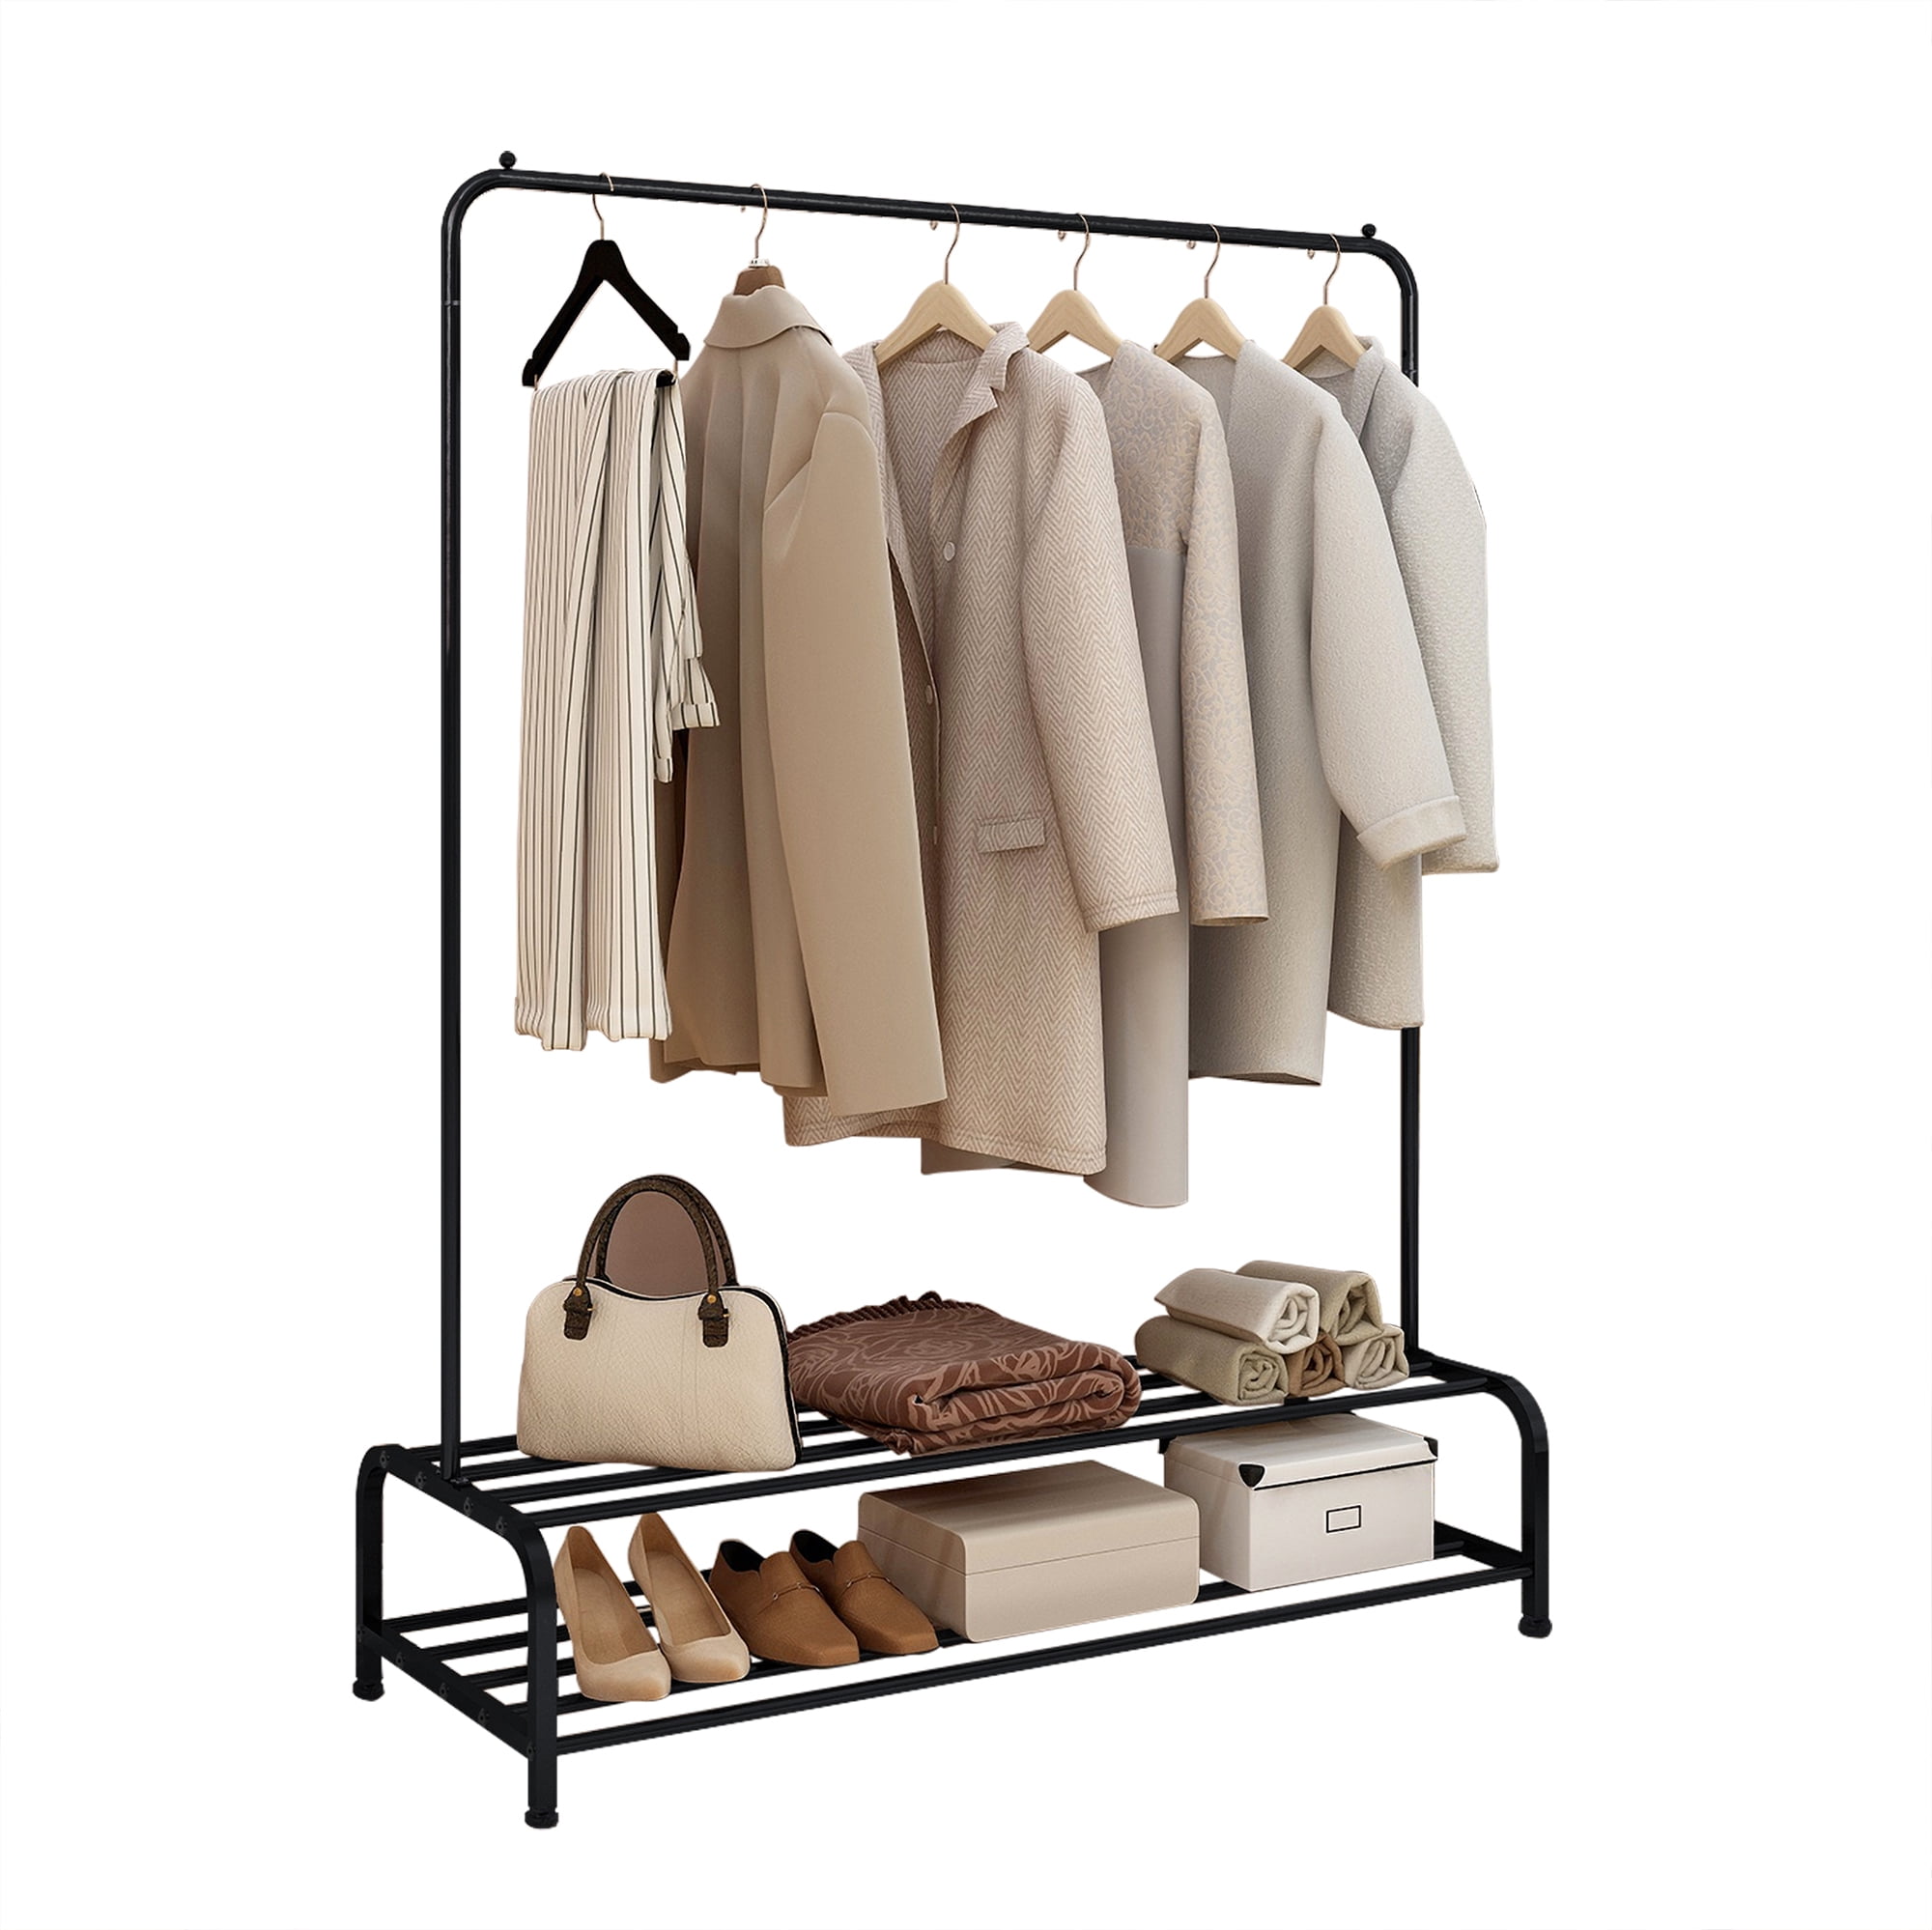 Dropship Clothing Garment Rack With Shelves, Metal Cloth Hanger Rack Stand  Clothes Drying Rack For Hanging Clothes to Sell Online at a Lower Price